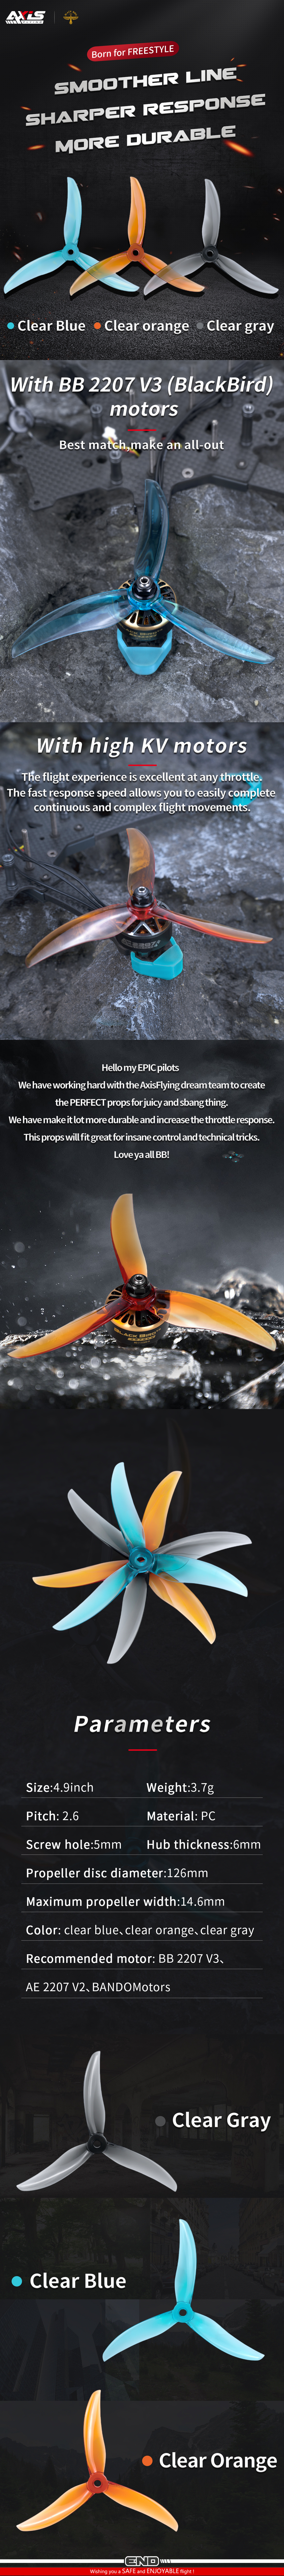 Axisflying co-brand with BlackBird V3 BB39 freestyle Props Axisflying BlackBird V2 props 4.9 inch 3 blade propellers for drones 5" props,freestyle props,sbang props,4.9" props,BlackBird props,propellers for drones,drone propeller 3 blade props,4.9 inch propellers,propellers